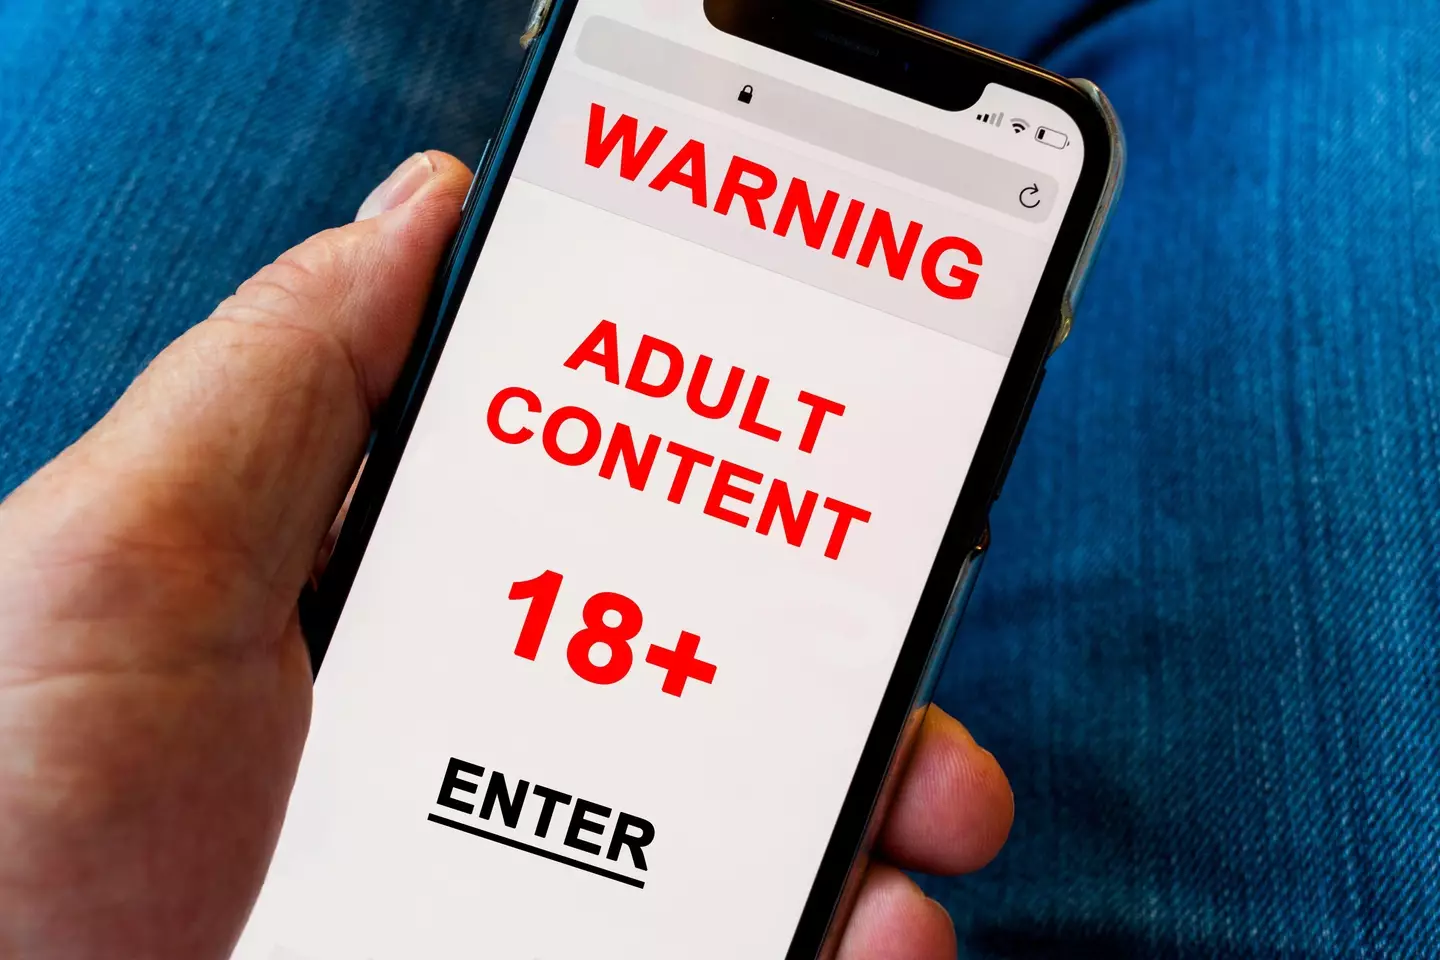 A new law in the US requires people to provide their age to access porn sites.